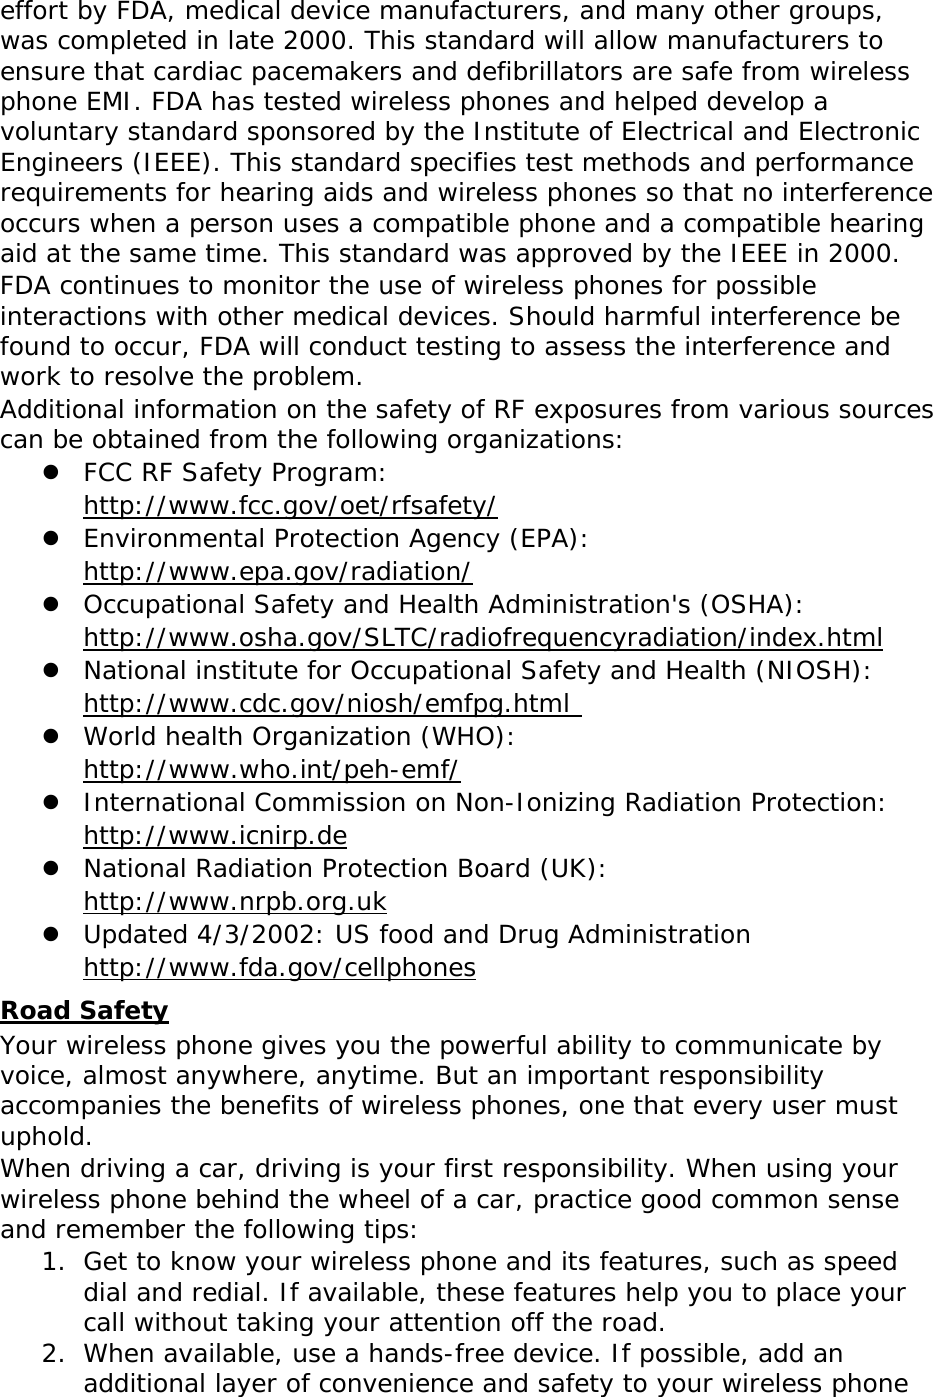 effort by FDA, medical device manufacturers, and many other groups, was completed in late 2000. This standard will allow manufacturers to ensure that cardiac pacemakers and defibrillators are safe from wireless phone EMI. FDA has tested wireless phones and helped develop a voluntary standard sponsored by the Institute of Electrical and Electronic Engineers (IEEE). This standard specifies test methods and performance requirements for hearing aids and wireless phones so that no interference occurs when a person uses a compatible phone and a compatible hearing aid at the same time. This standard was approved by the IEEE in 2000. FDA continues to monitor the use of wireless phones for possible interactions with other medical devices. Should harmful interference be found to occur, FDA will conduct testing to assess the interference and work to resolve the problem. Additional information on the safety of RF exposures from various sources can be obtained from the following organizations:  FCC RF Safety Program:  Uhttp://www.fcc.gov/oet/rfsafety/U  Environmental Protection Agency (EPA):  Uhttp://www.epa.gov/radiation/U  Occupational Safety and Health Administration&apos;s (OSHA):        Uhttp://www.osha.gov/SLTC/radiofrequencyradiation/index.htmlU  National institute for Occupational Safety and Health (NIOSH):  Uhttp://www.cdc.gov/niosh/emfpg.html   World health Organization (WHO):  Uhttp://www.who.int/peh-emf/  International Commission on Non-Ionizing Radiation Protection:  Uhttp://www.icnirp.de  National Radiation Protection Board (UK):  Uhttp://www.nrpb.org.uk  Updated 4/3/2002: US food and Drug Administration  Uhttp://www.fda.gov/cellphones URoad Safety Your wireless phone gives you the powerful ability to communicate by voice, almost anywhere, anytime. But an important responsibility accompanies the benefits of wireless phones, one that every user must uphold. When driving a car, driving is your first responsibility. When using your wireless phone behind the wheel of a car, practice good common sense and remember the following tips: 1. Get to know your wireless phone and its features, such as speed dial and redial. If available, these features help you to place your call without taking your attention off the road. 2. When available, use a hands-free device. If possible, add an additional layer of convenience and safety to your wireless phone 